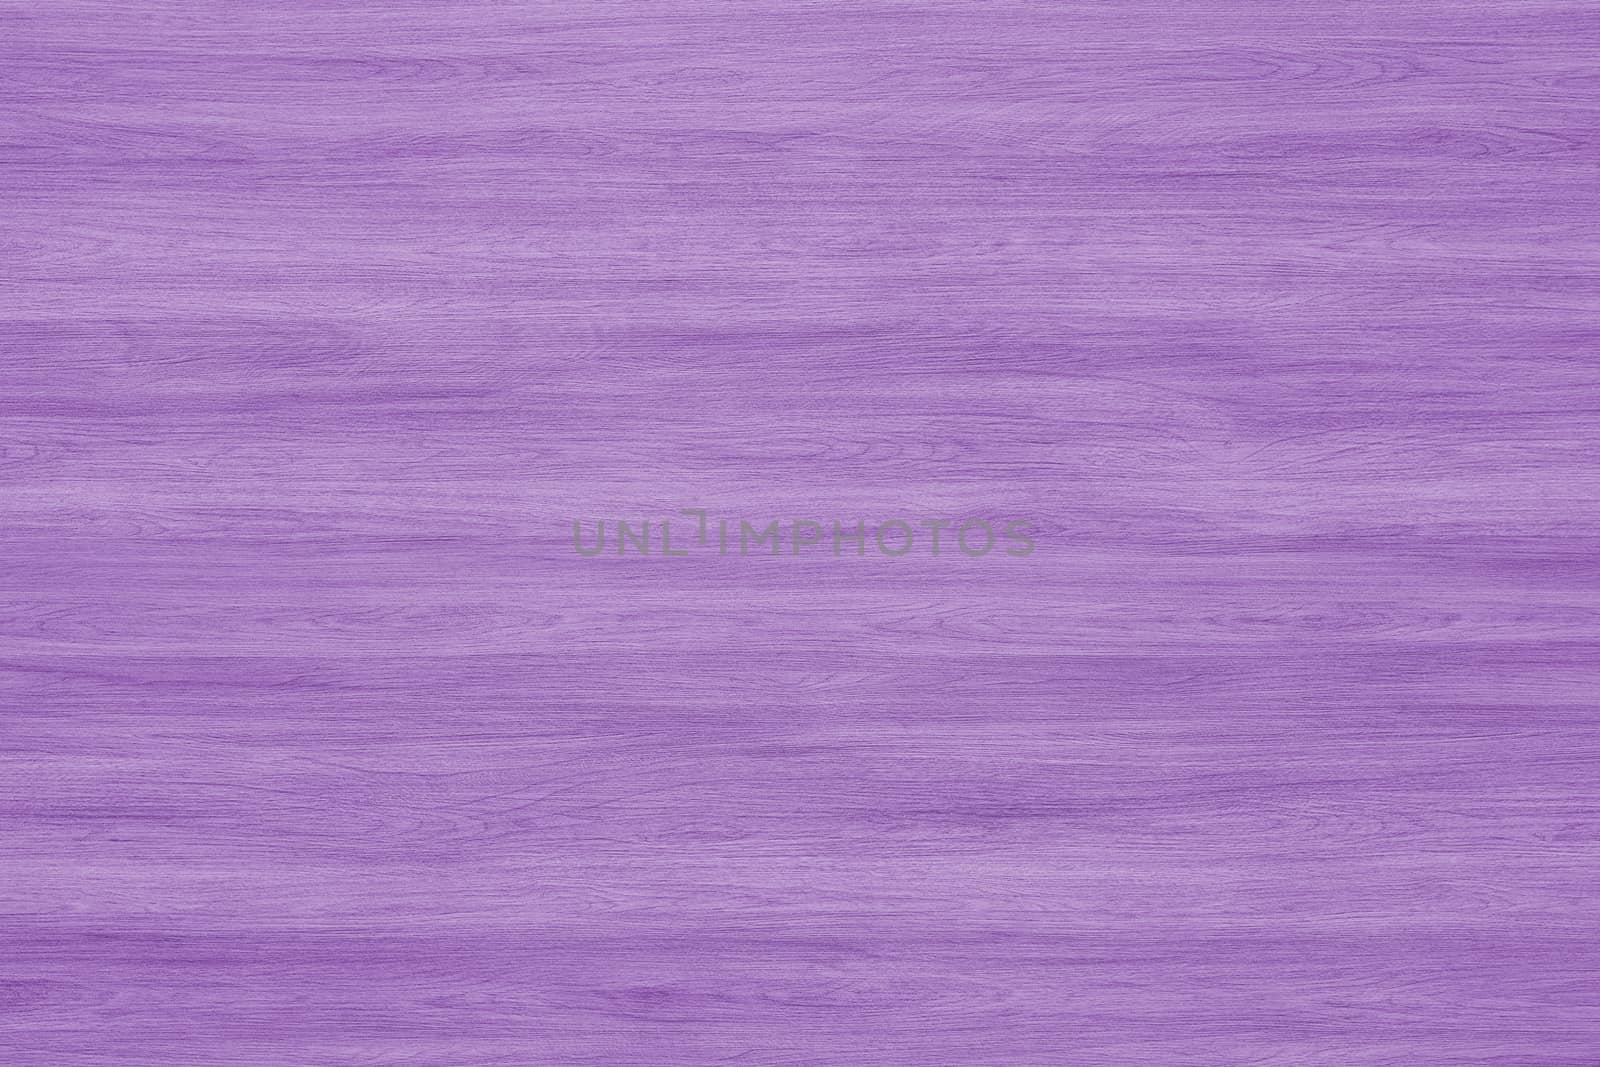 Ultra Violet Wooden background, Texture of Purple color paint plank wall for background.